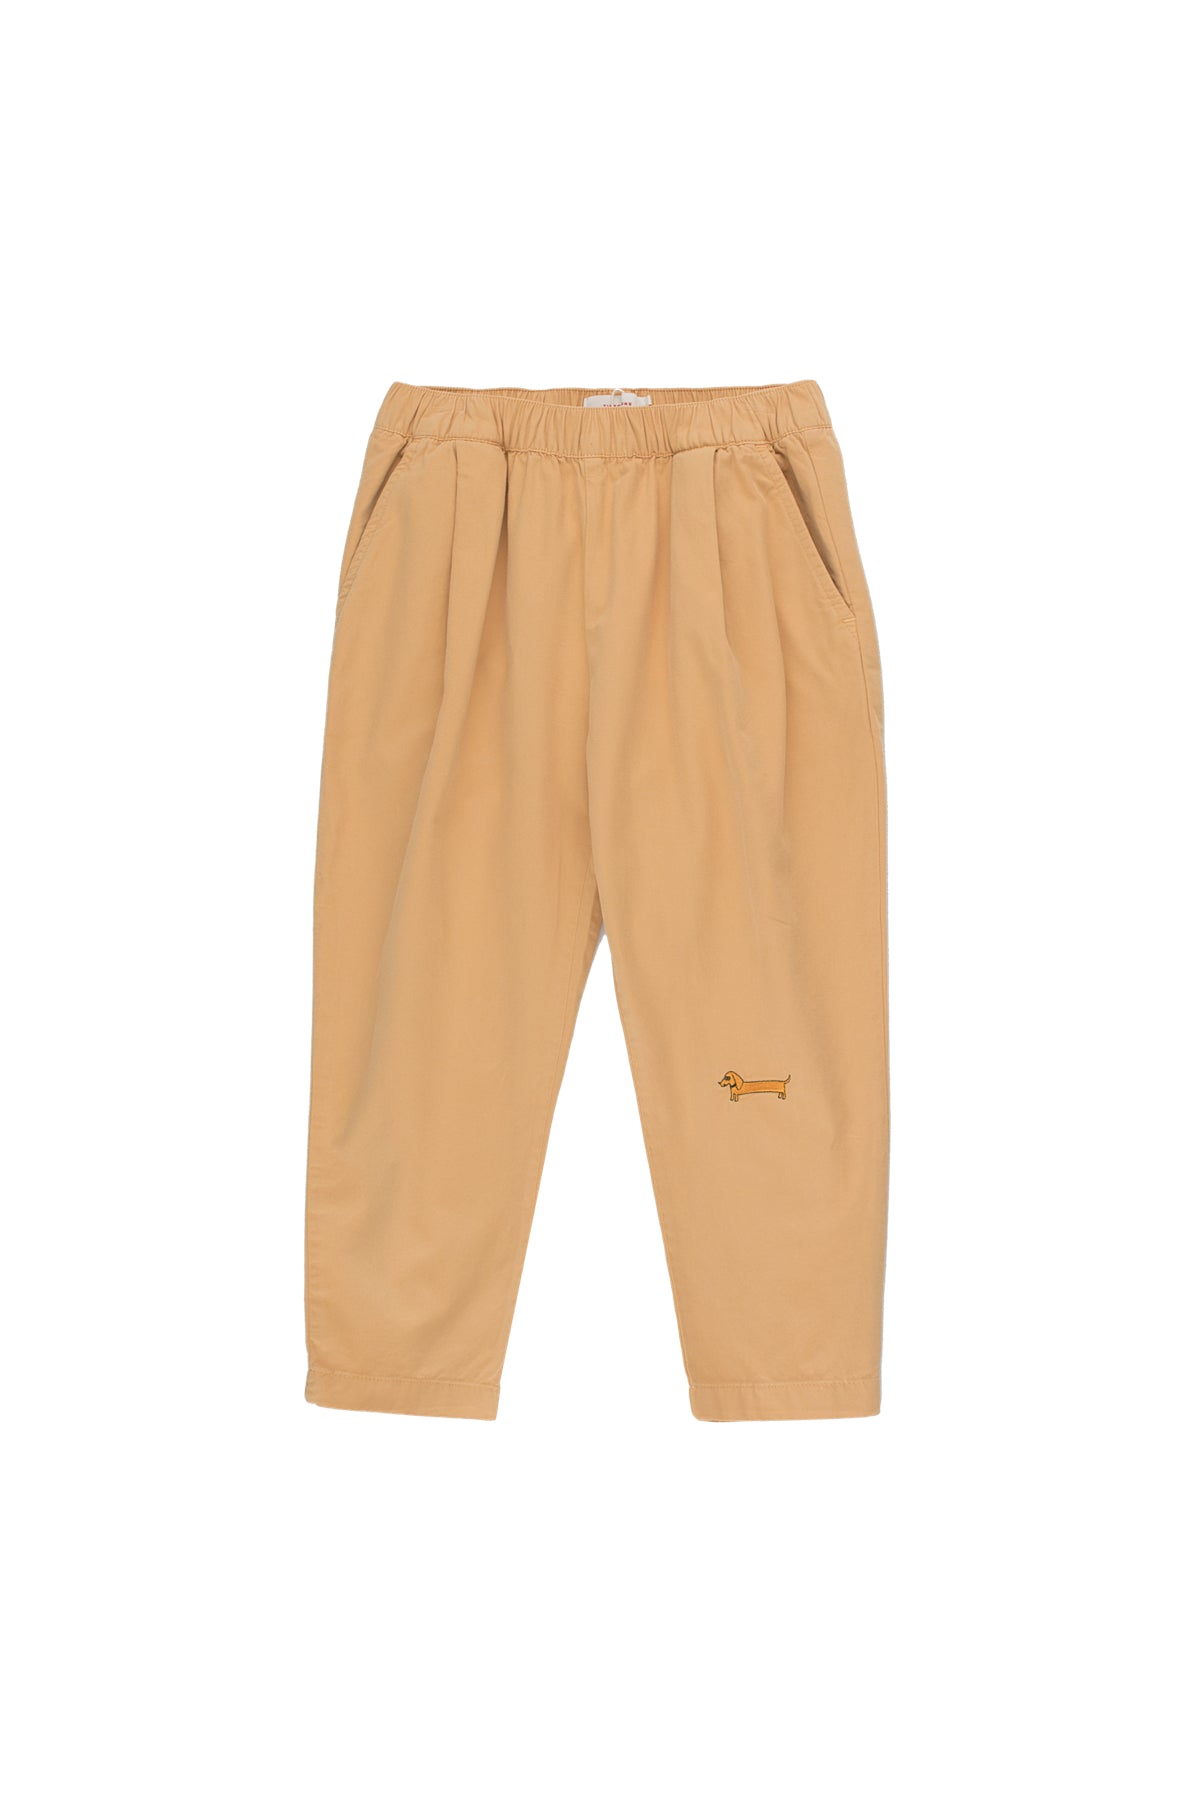 Boys & Girls Toffee Cotton Trousers